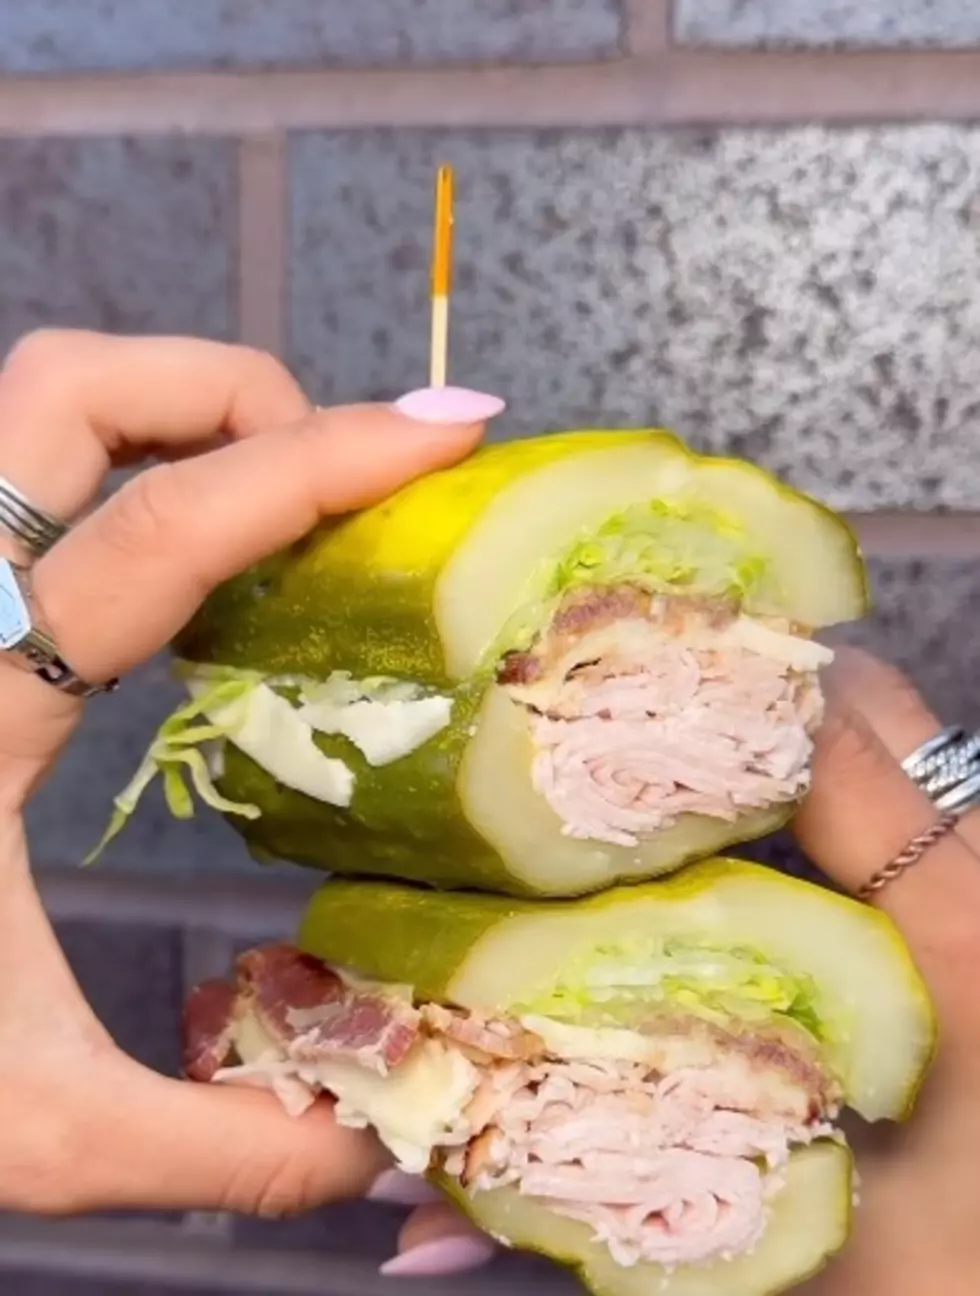 Many Traveling From Across U.S. To Try Viral New York Pickle Sandwich